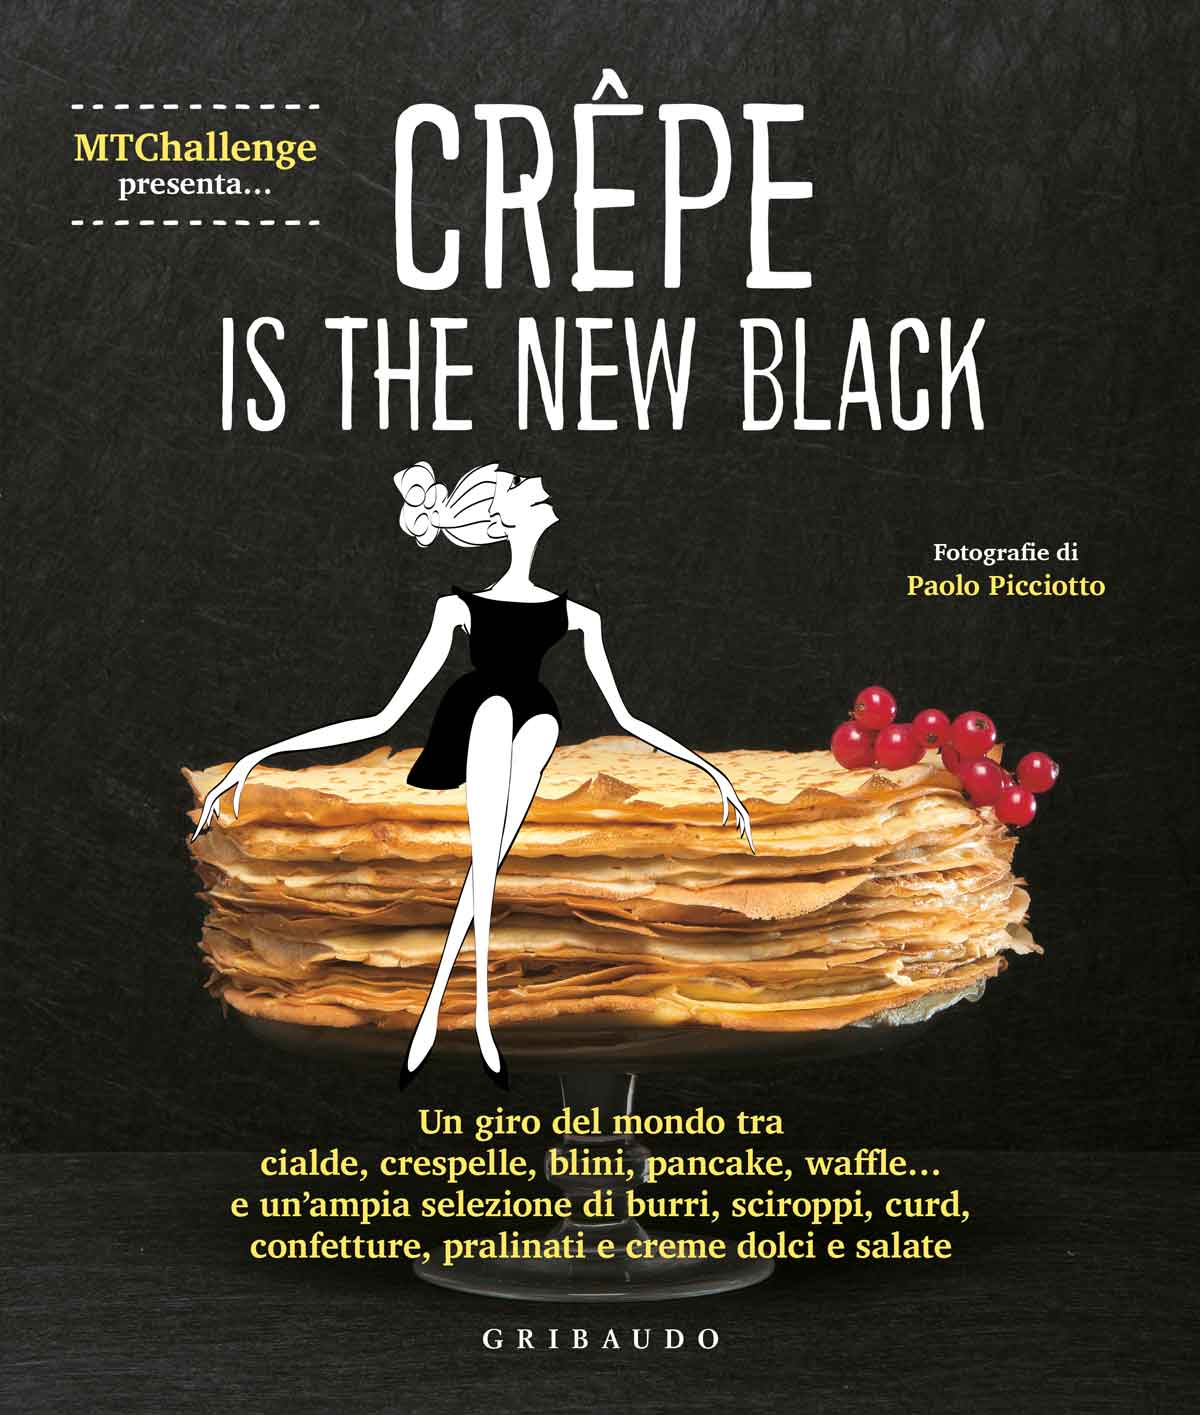 Crepe is the new black